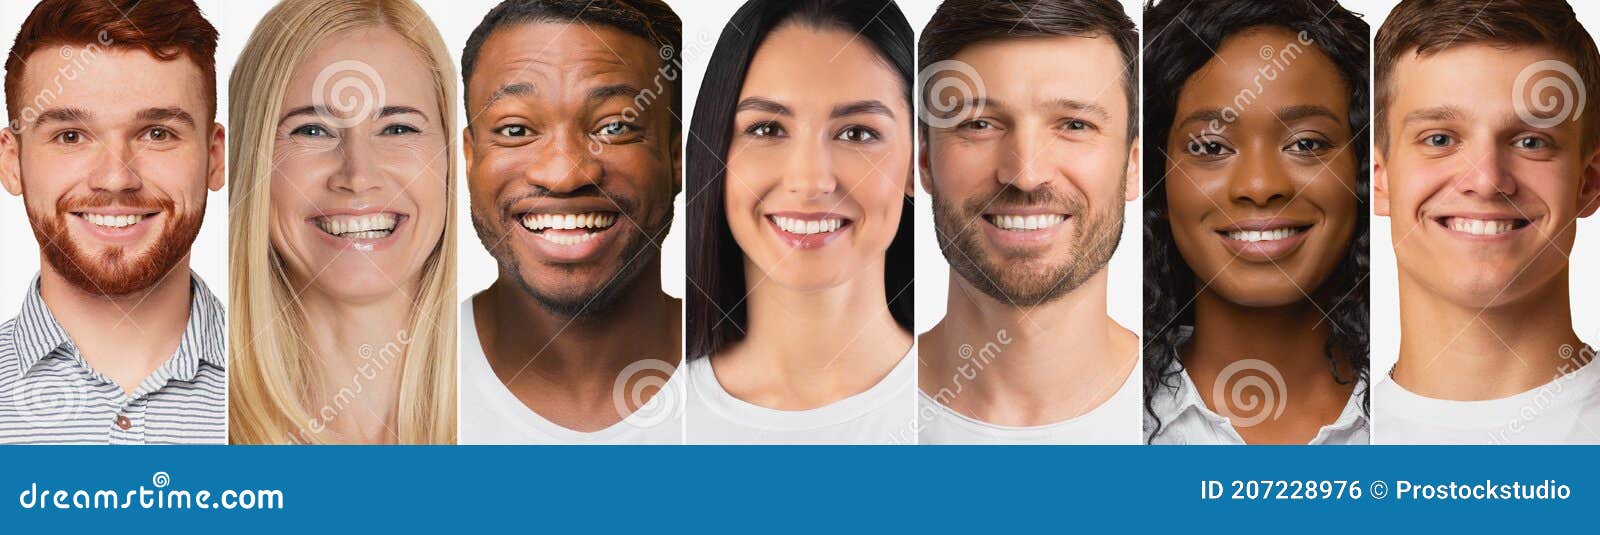 diverse millennials females and males portraits over white background. collage